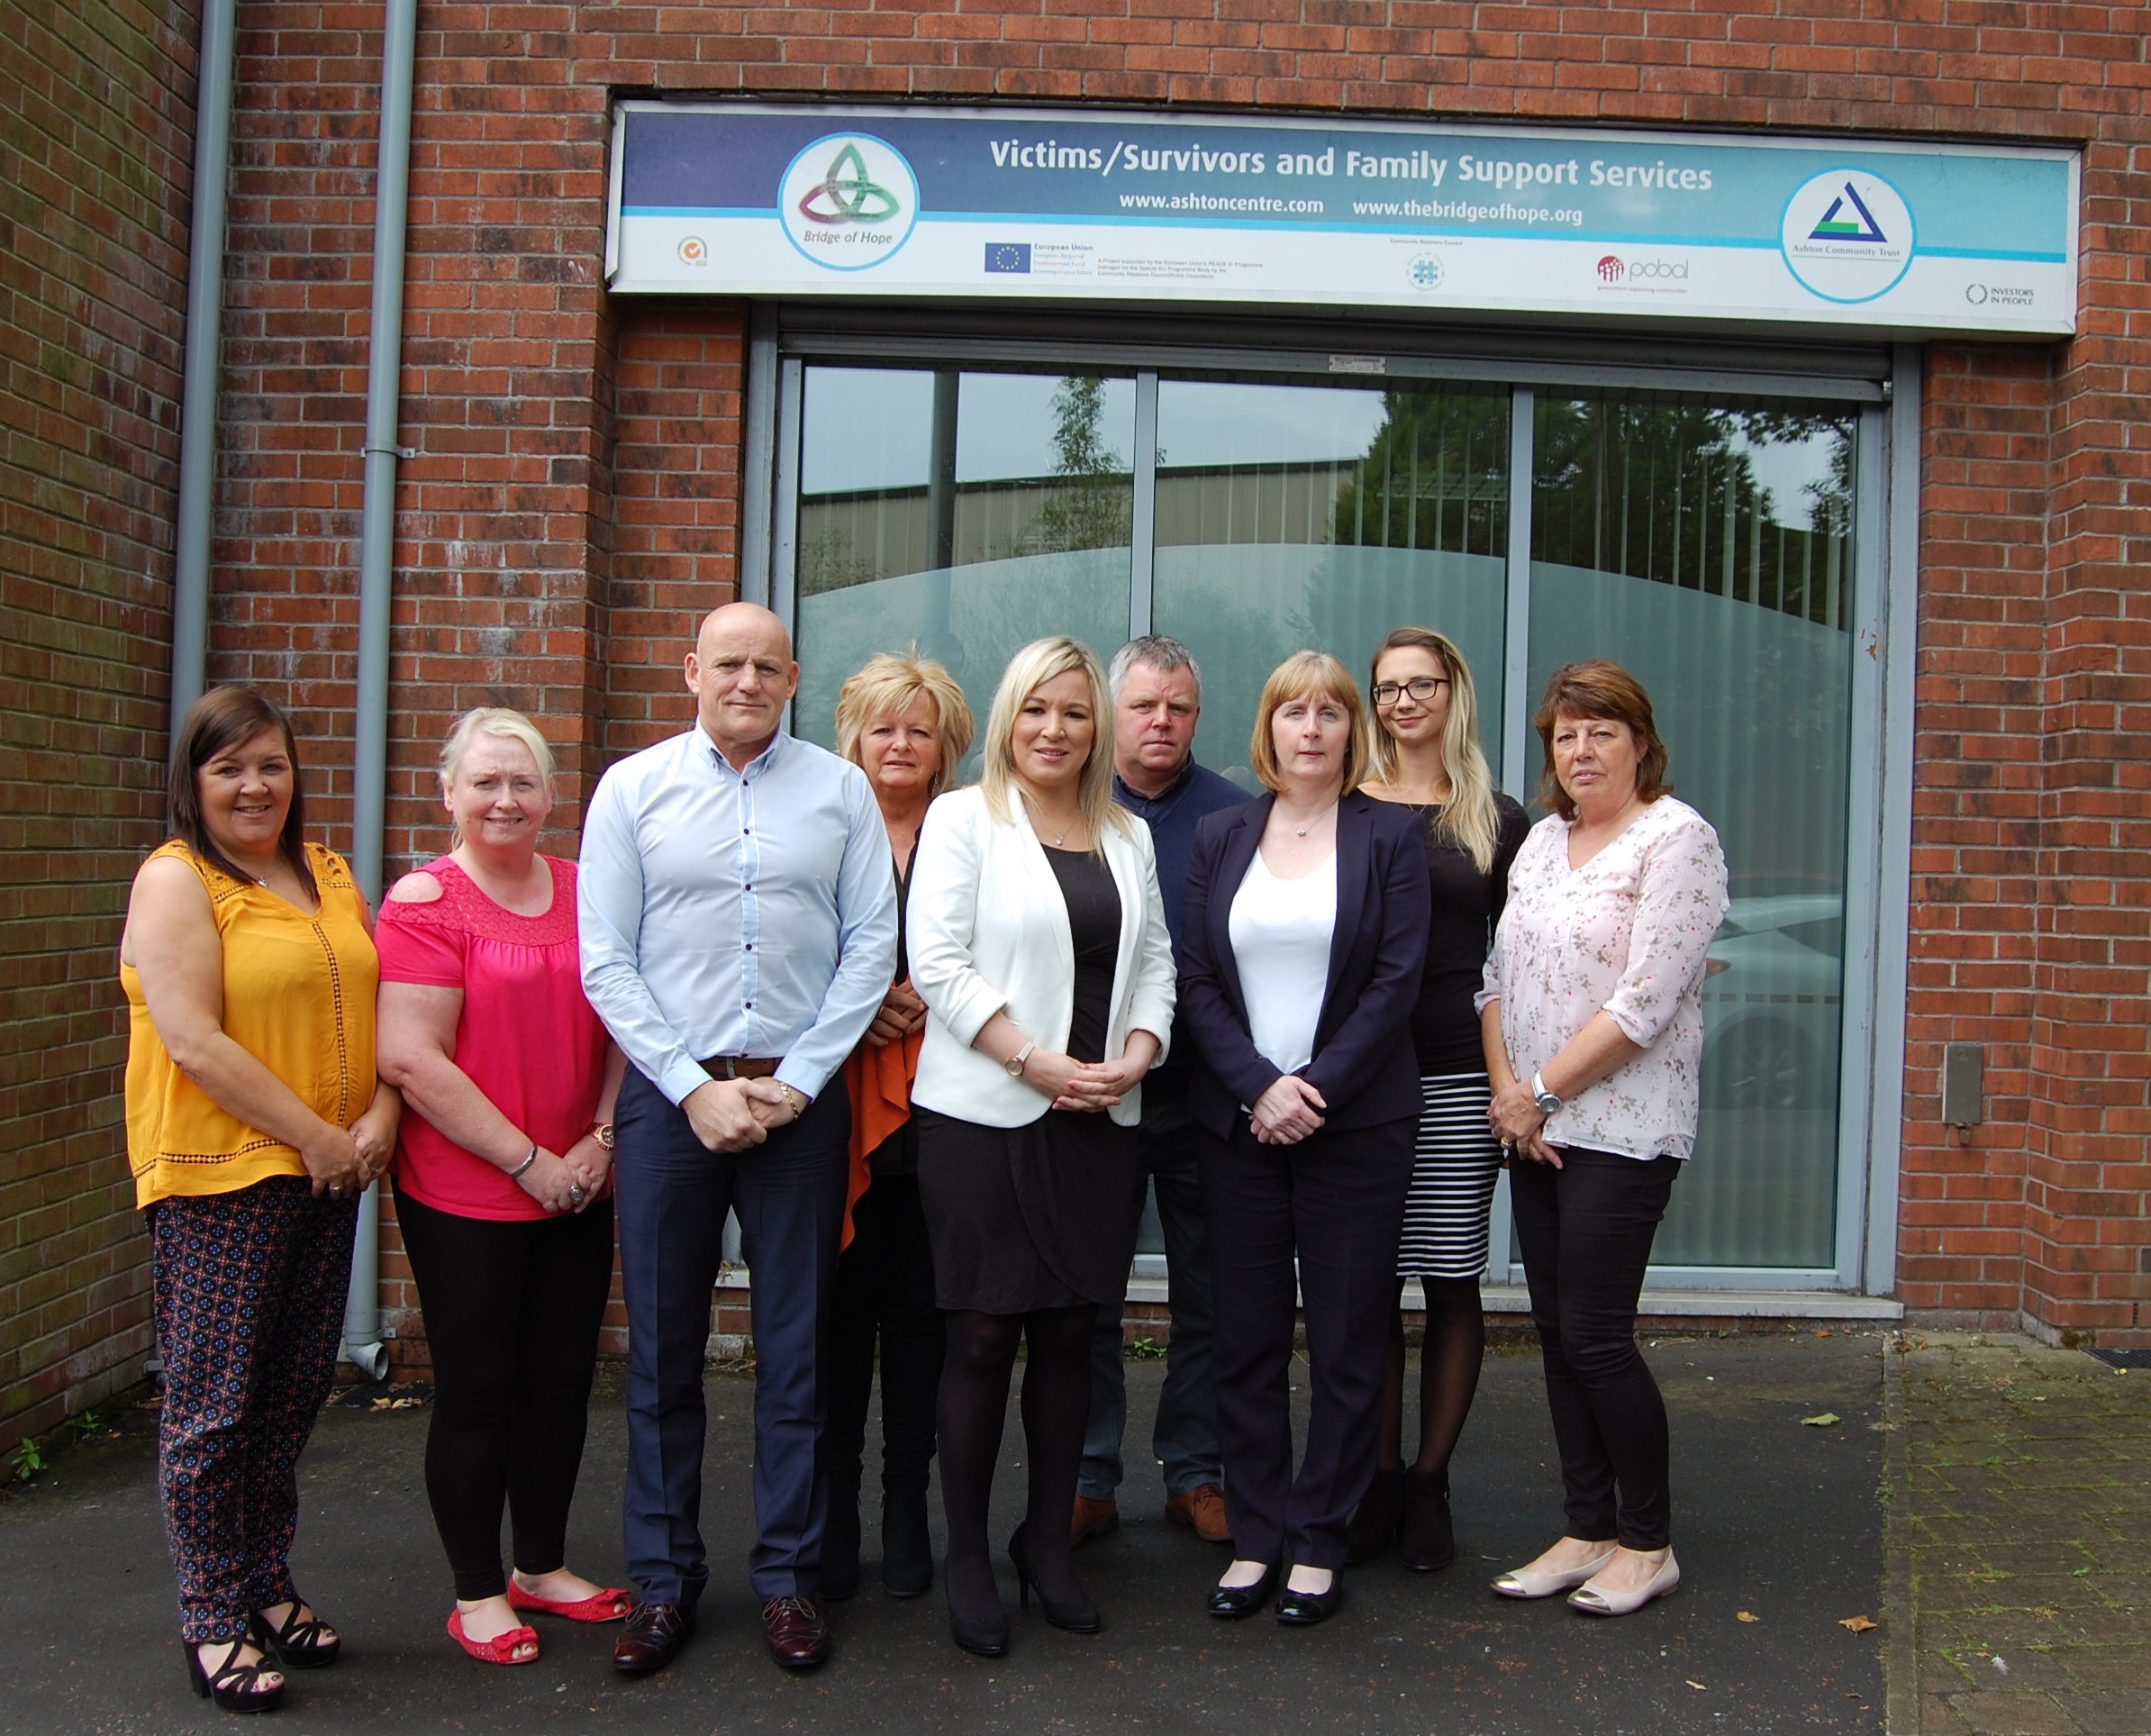 Health Minister meets Belfast community groups to discuss suicide prevention